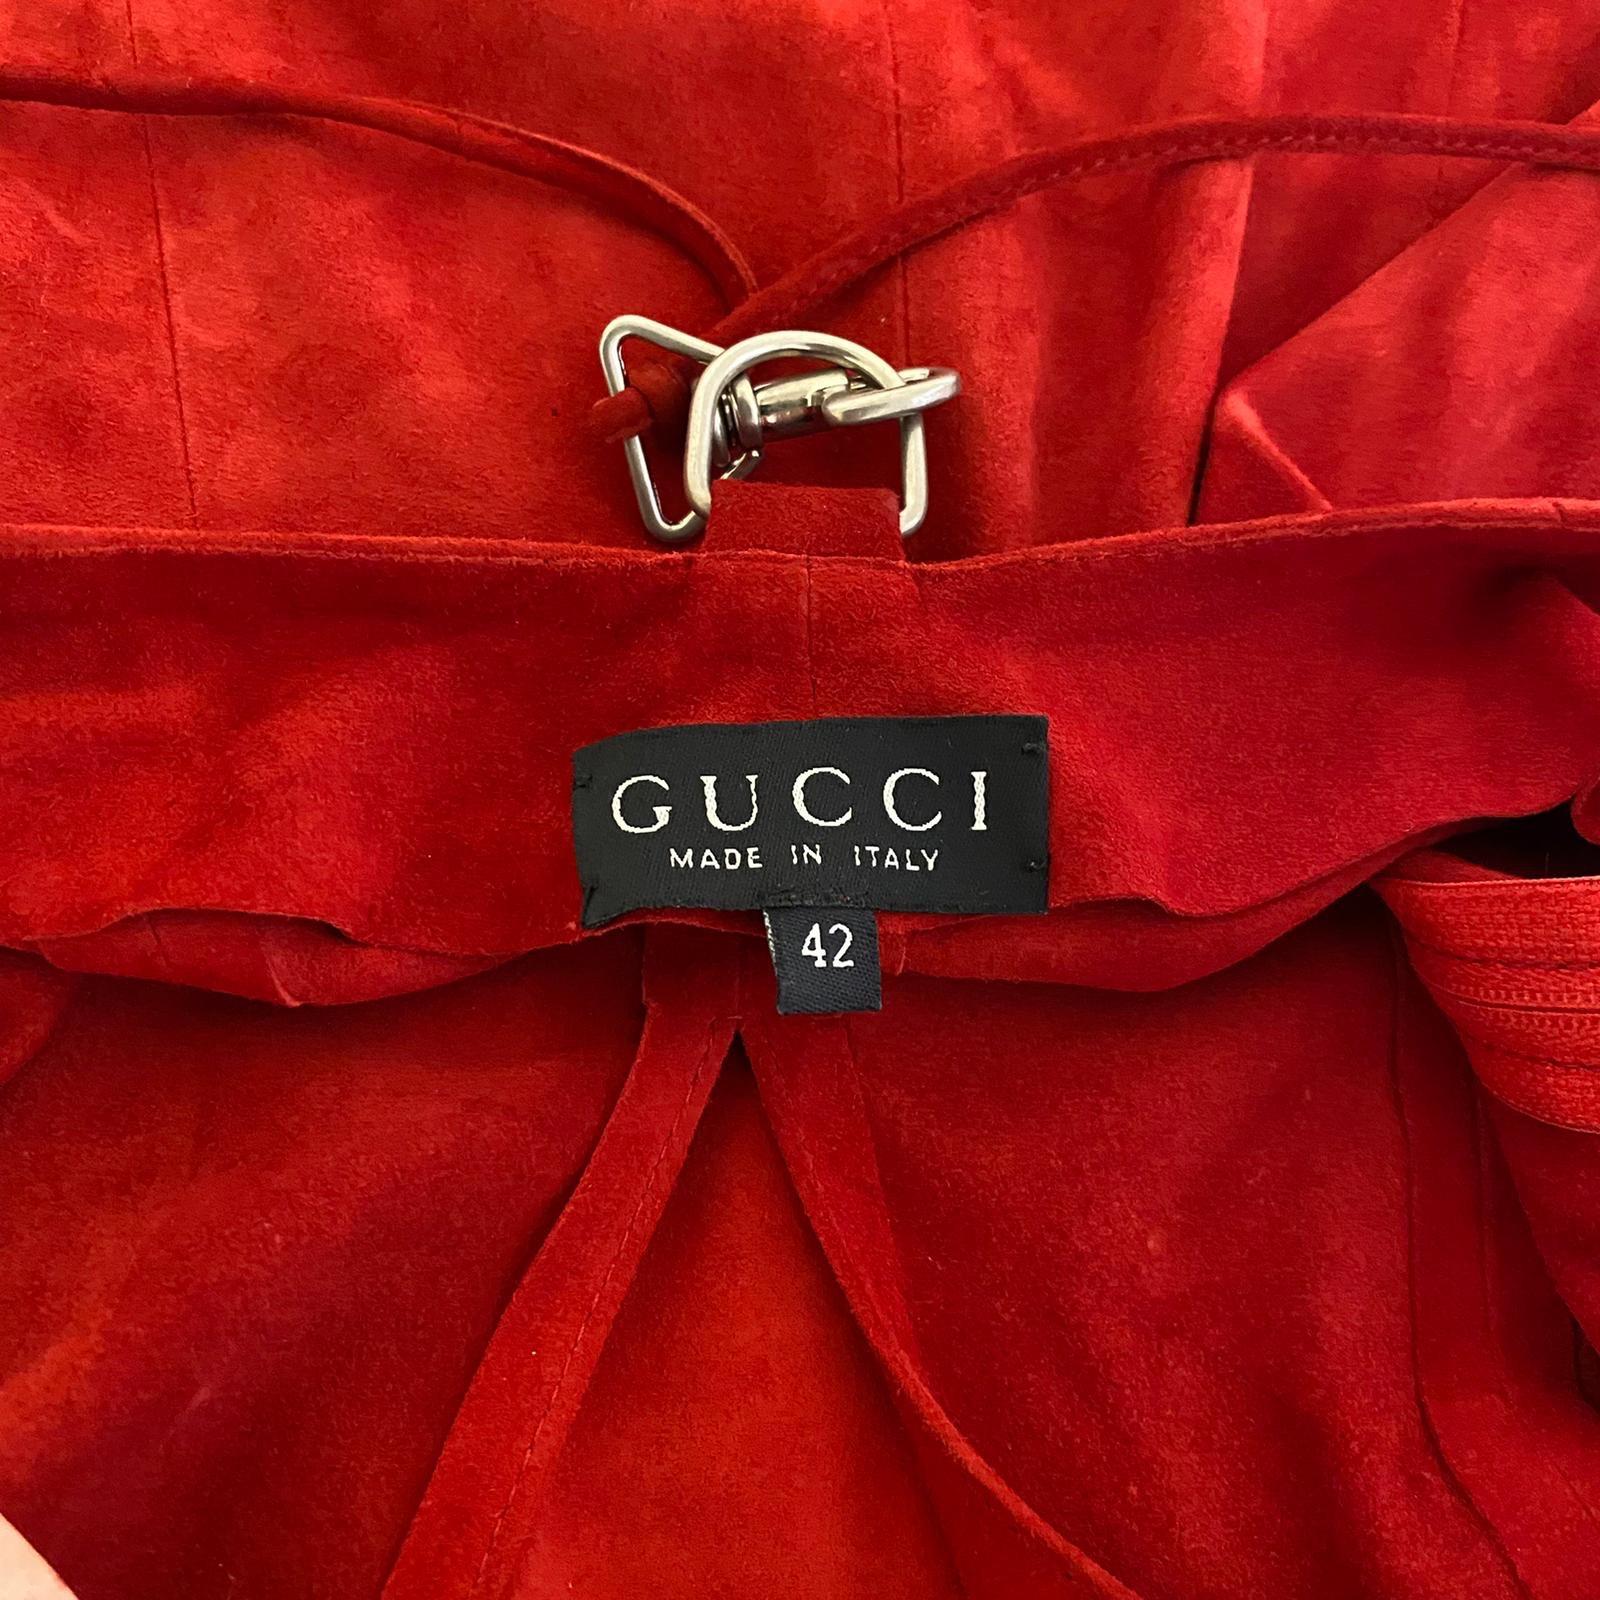 Gucci S/S 1995 Red Suede Cut-out Halter Dress 1